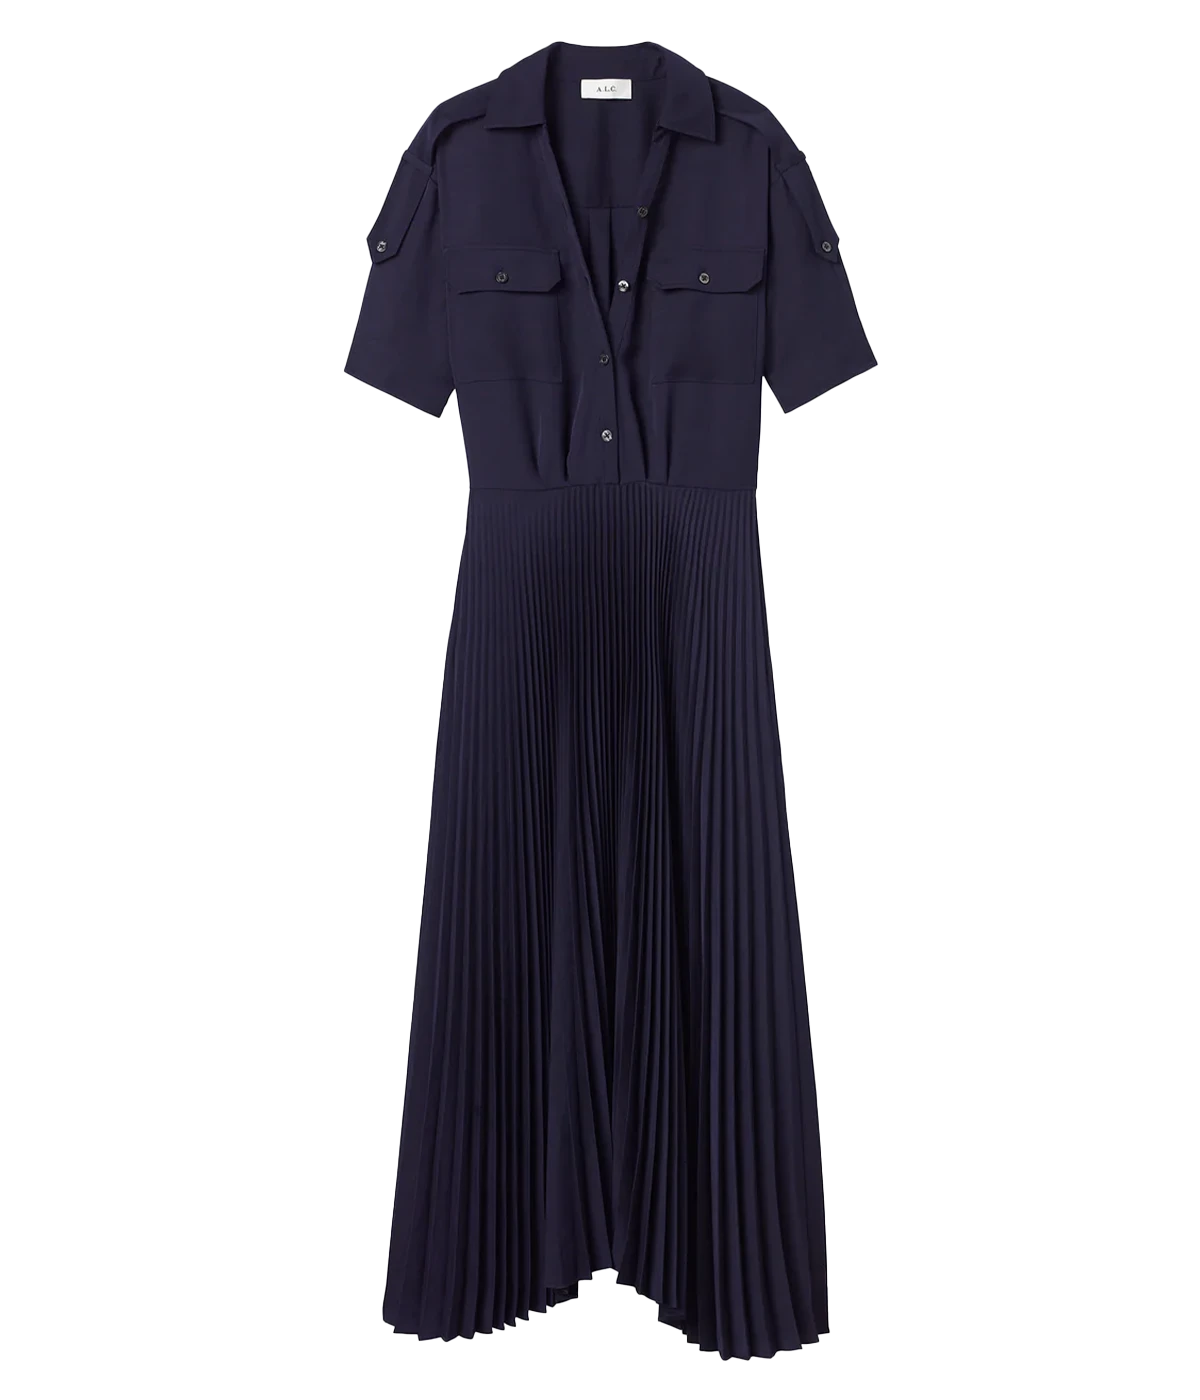 Liam Dress in Maritime Navy